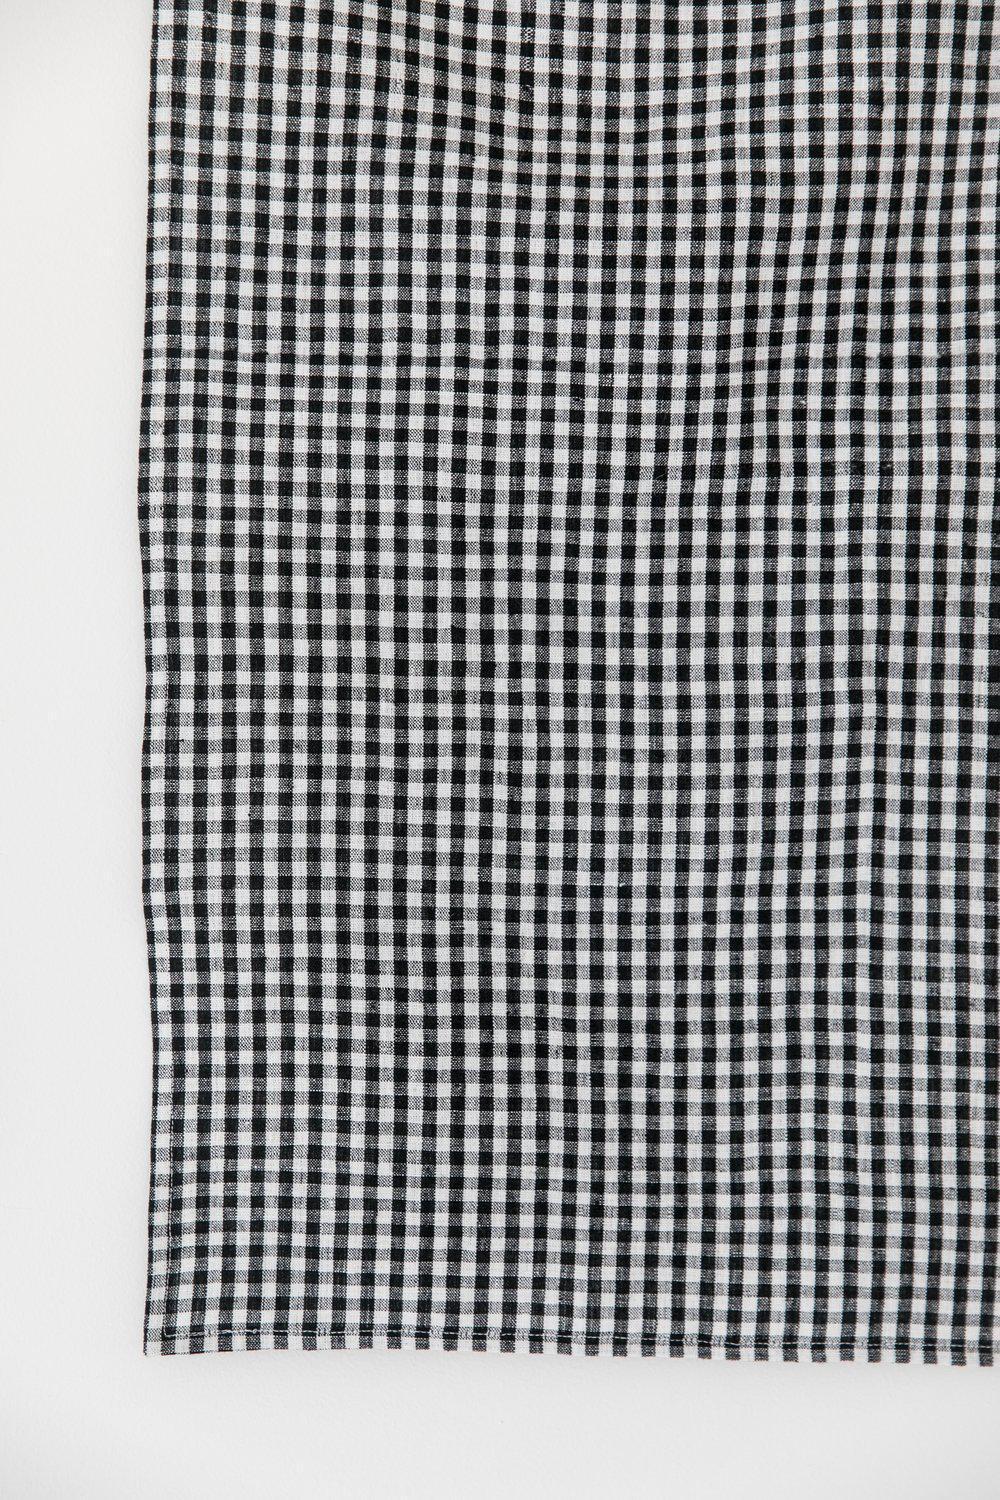 Cotton Kitchen Towelling Fabric in Small Black Check - 16In, Specialty Fabric, Mad About Patchwork, [variant_title] - Mad About Patchwork